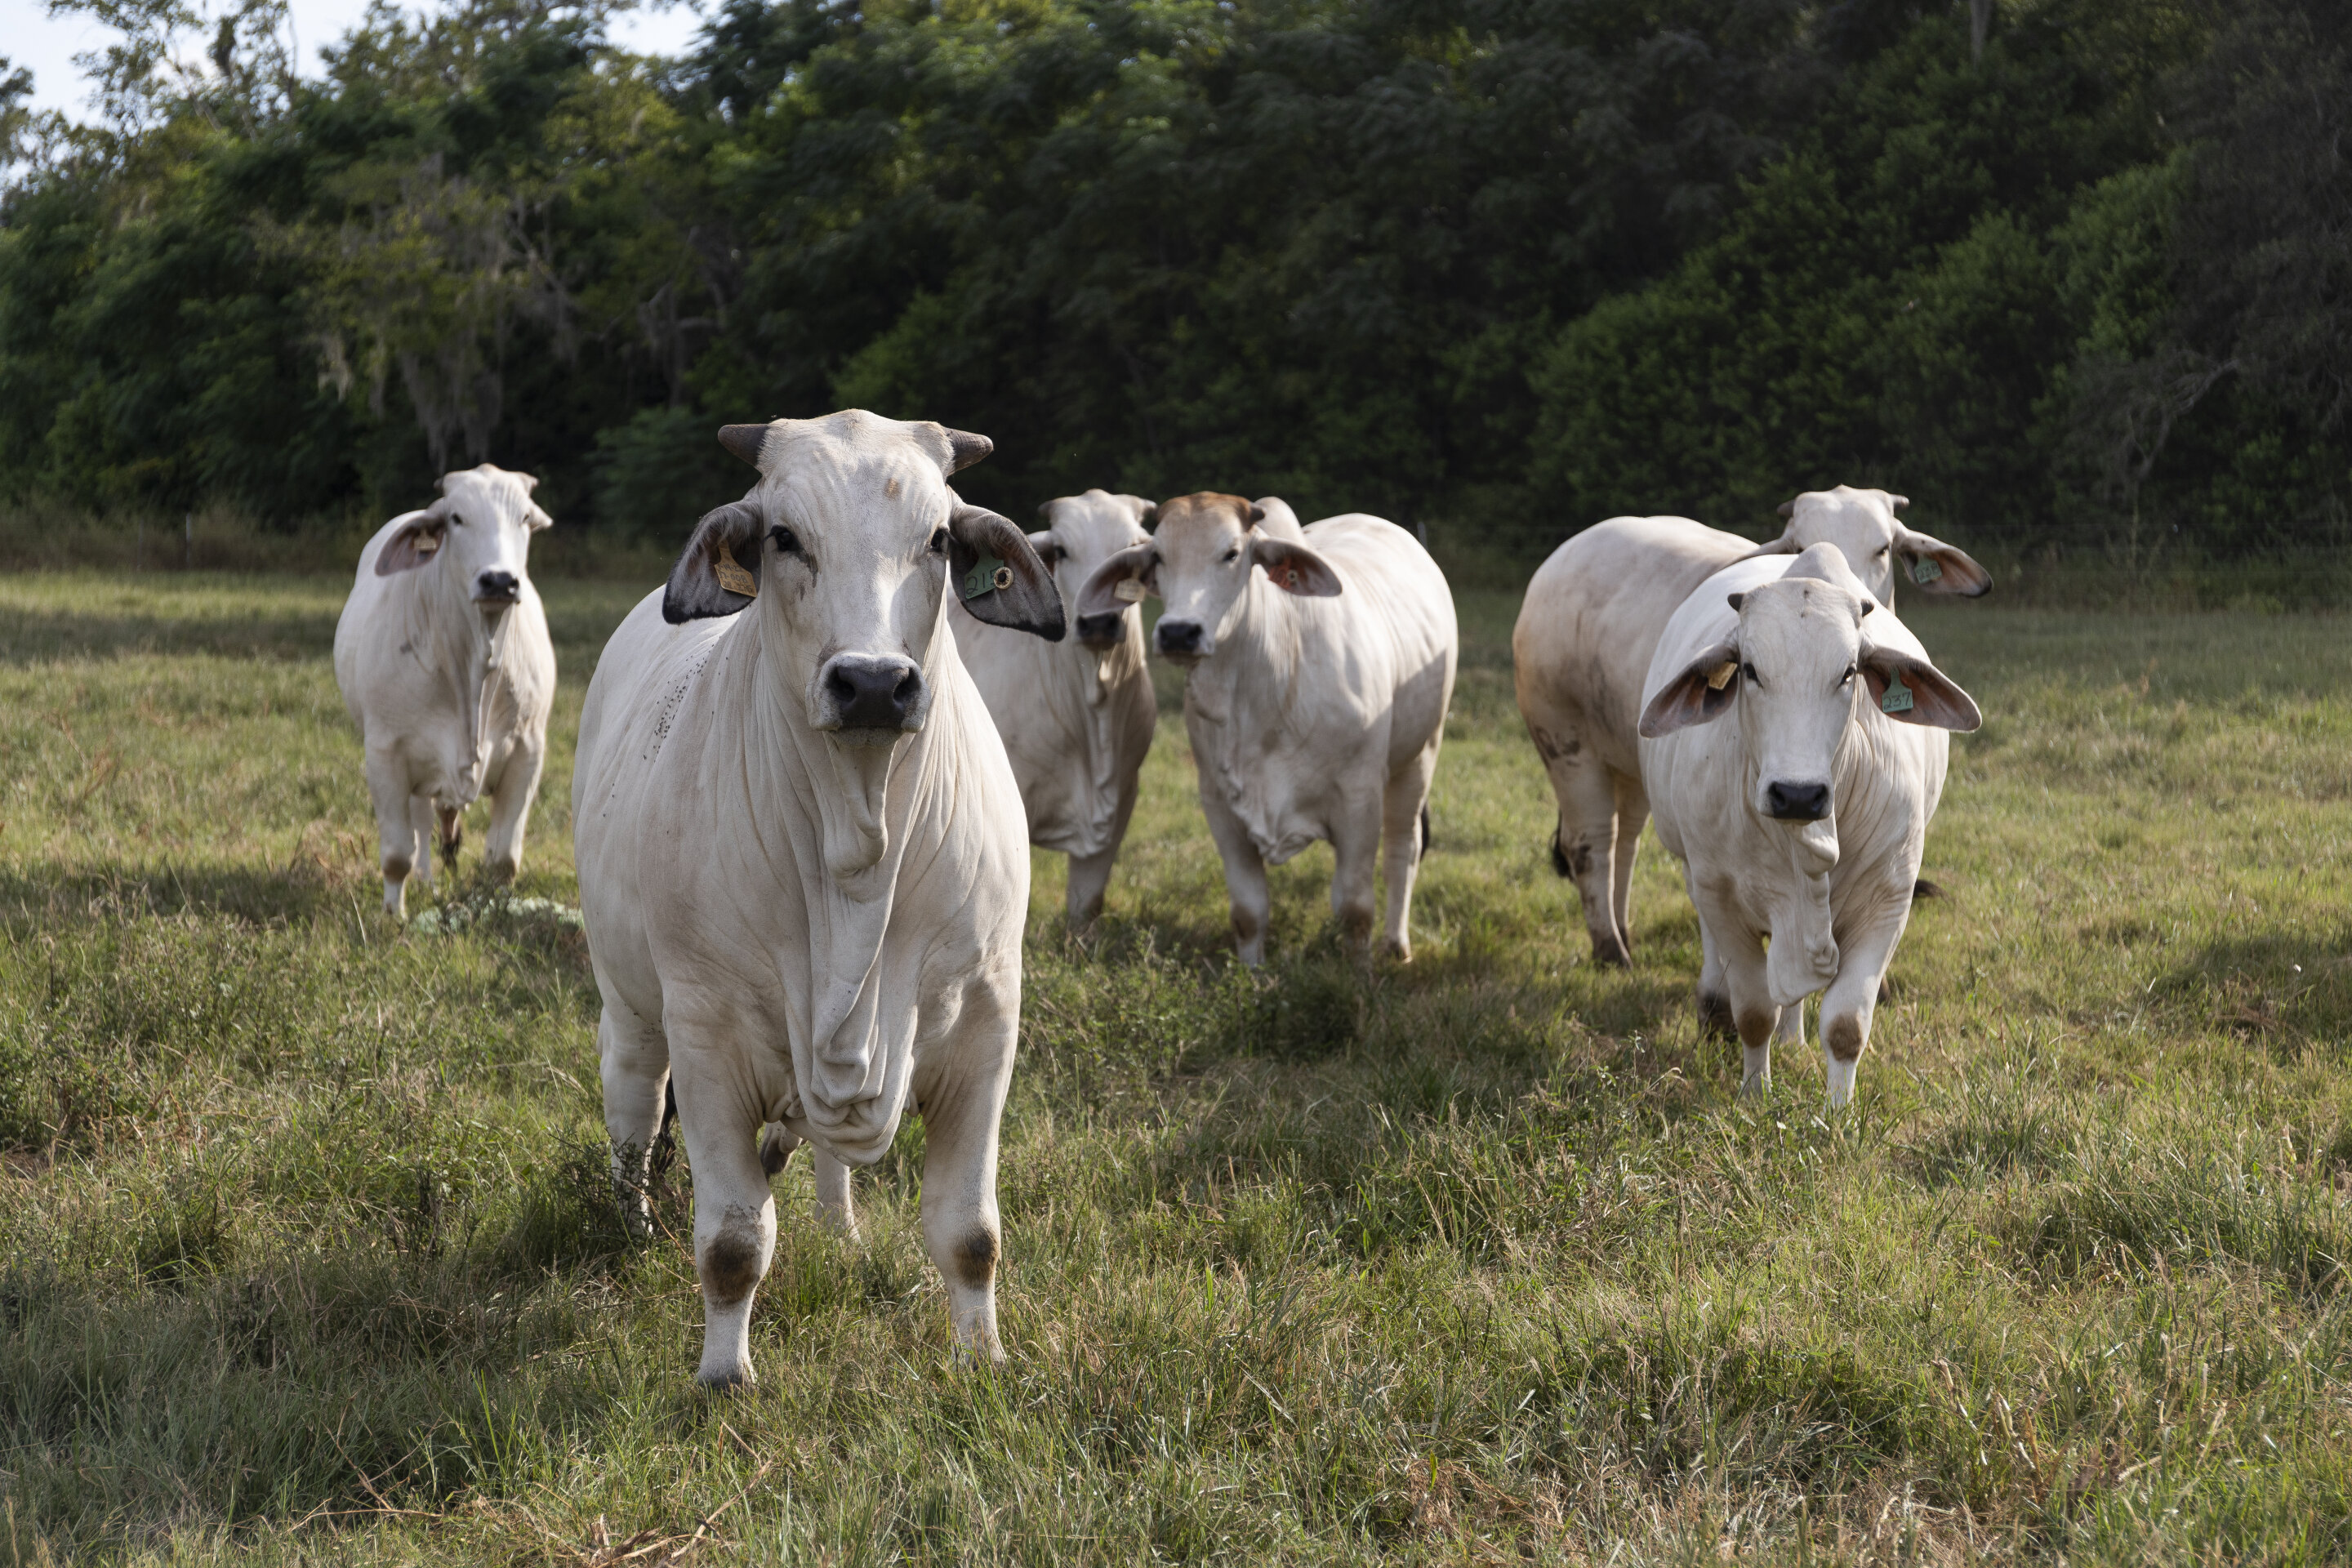 #Sweaty cattle may boost food security in a warming world